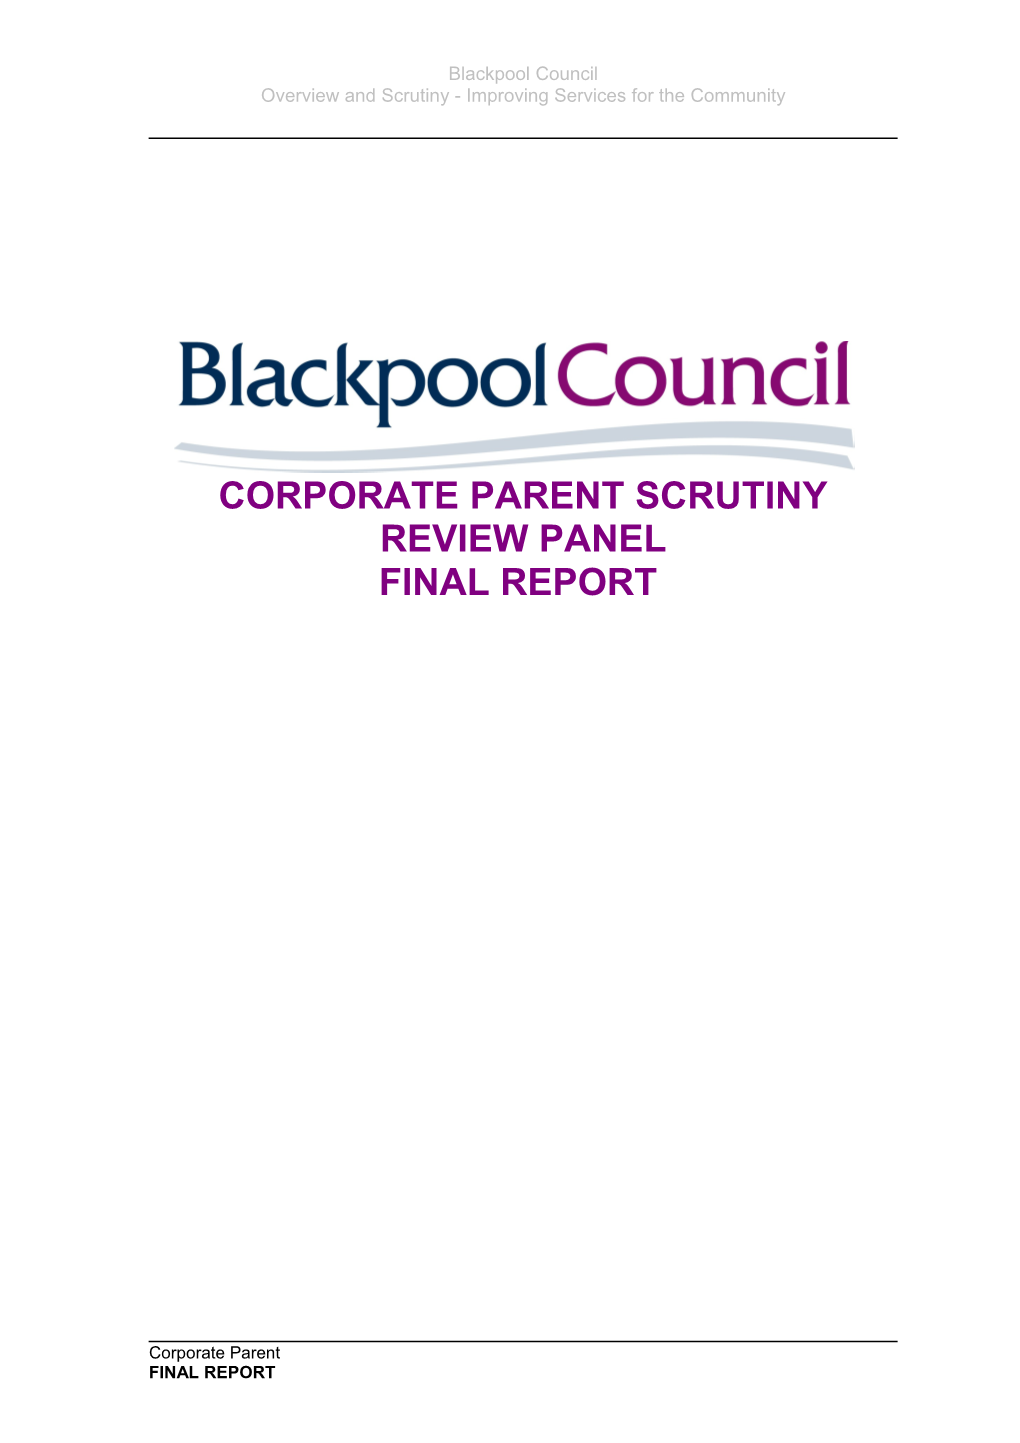 Overview and Scrutiny - Improving Services for the Community